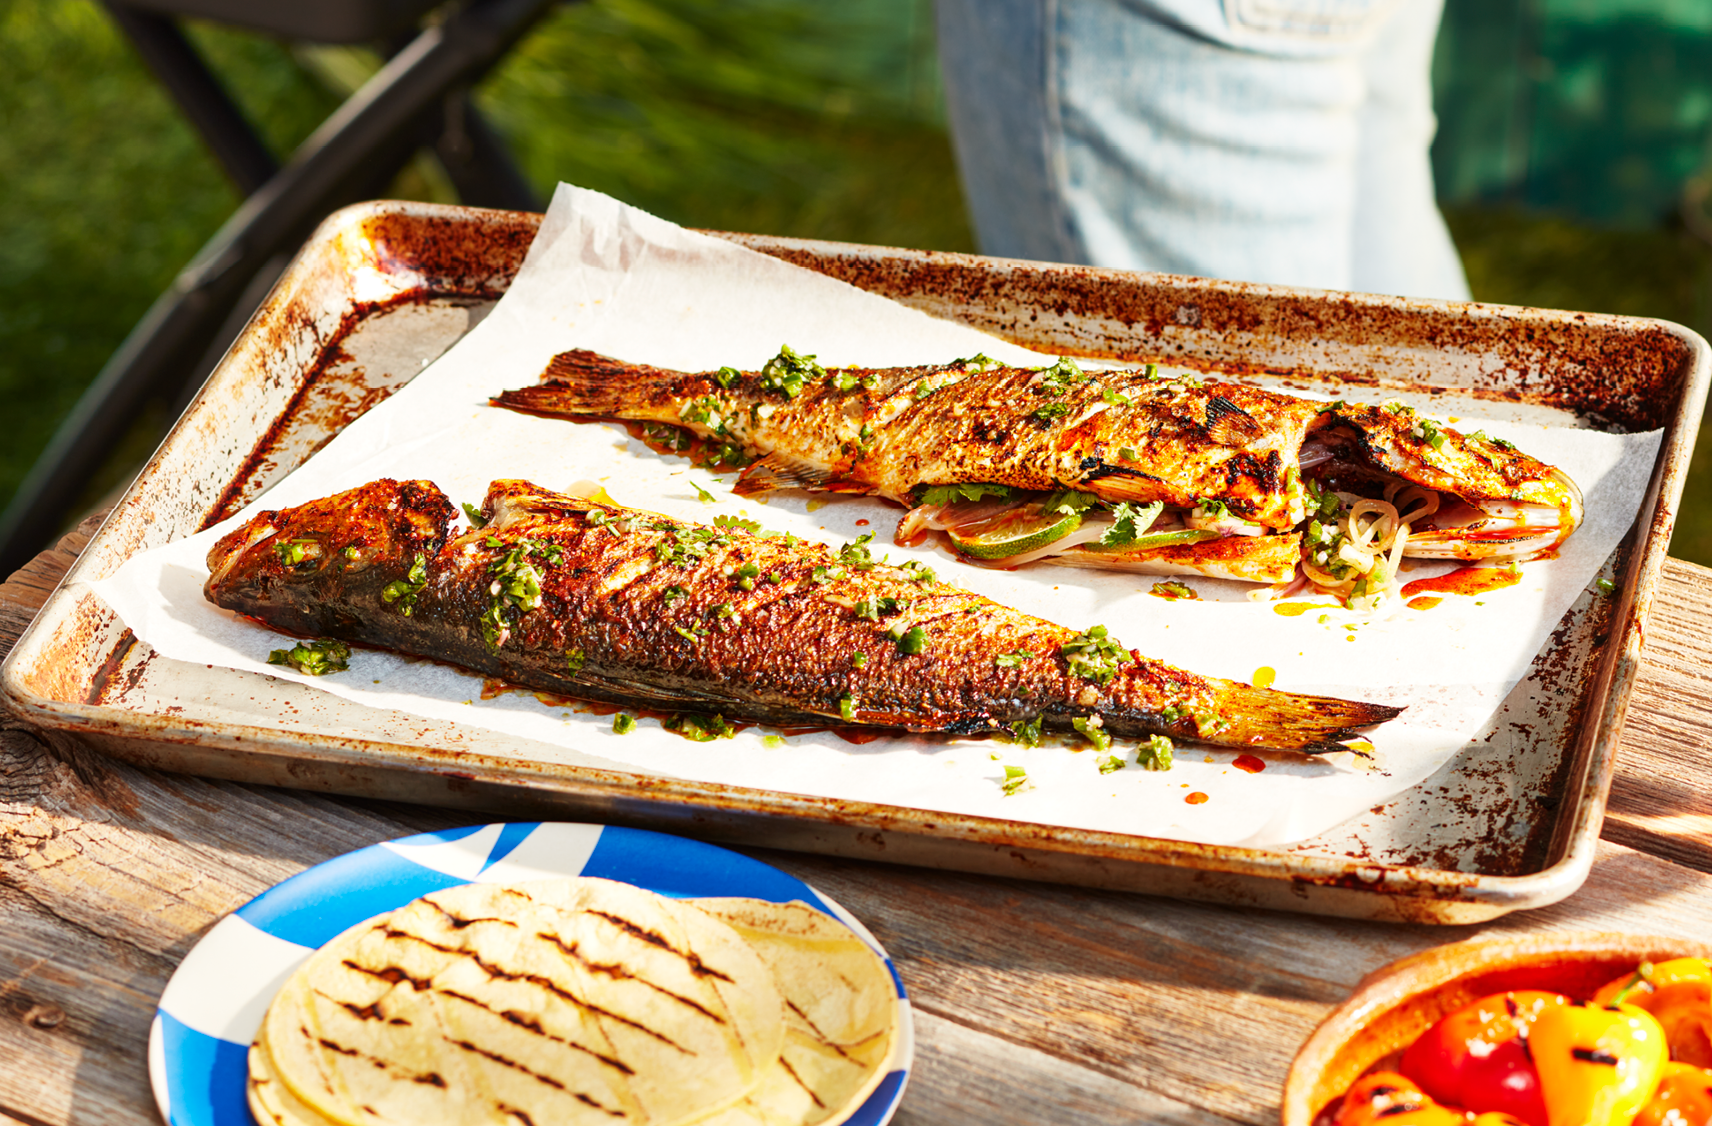 Two pieces of grilled whole fish with topped with Jalapeño Salsa and Sweet Peppers on a sturdy cast-iron grill pan next to a plate of grilled Halloom and another plate of grilled peppers.